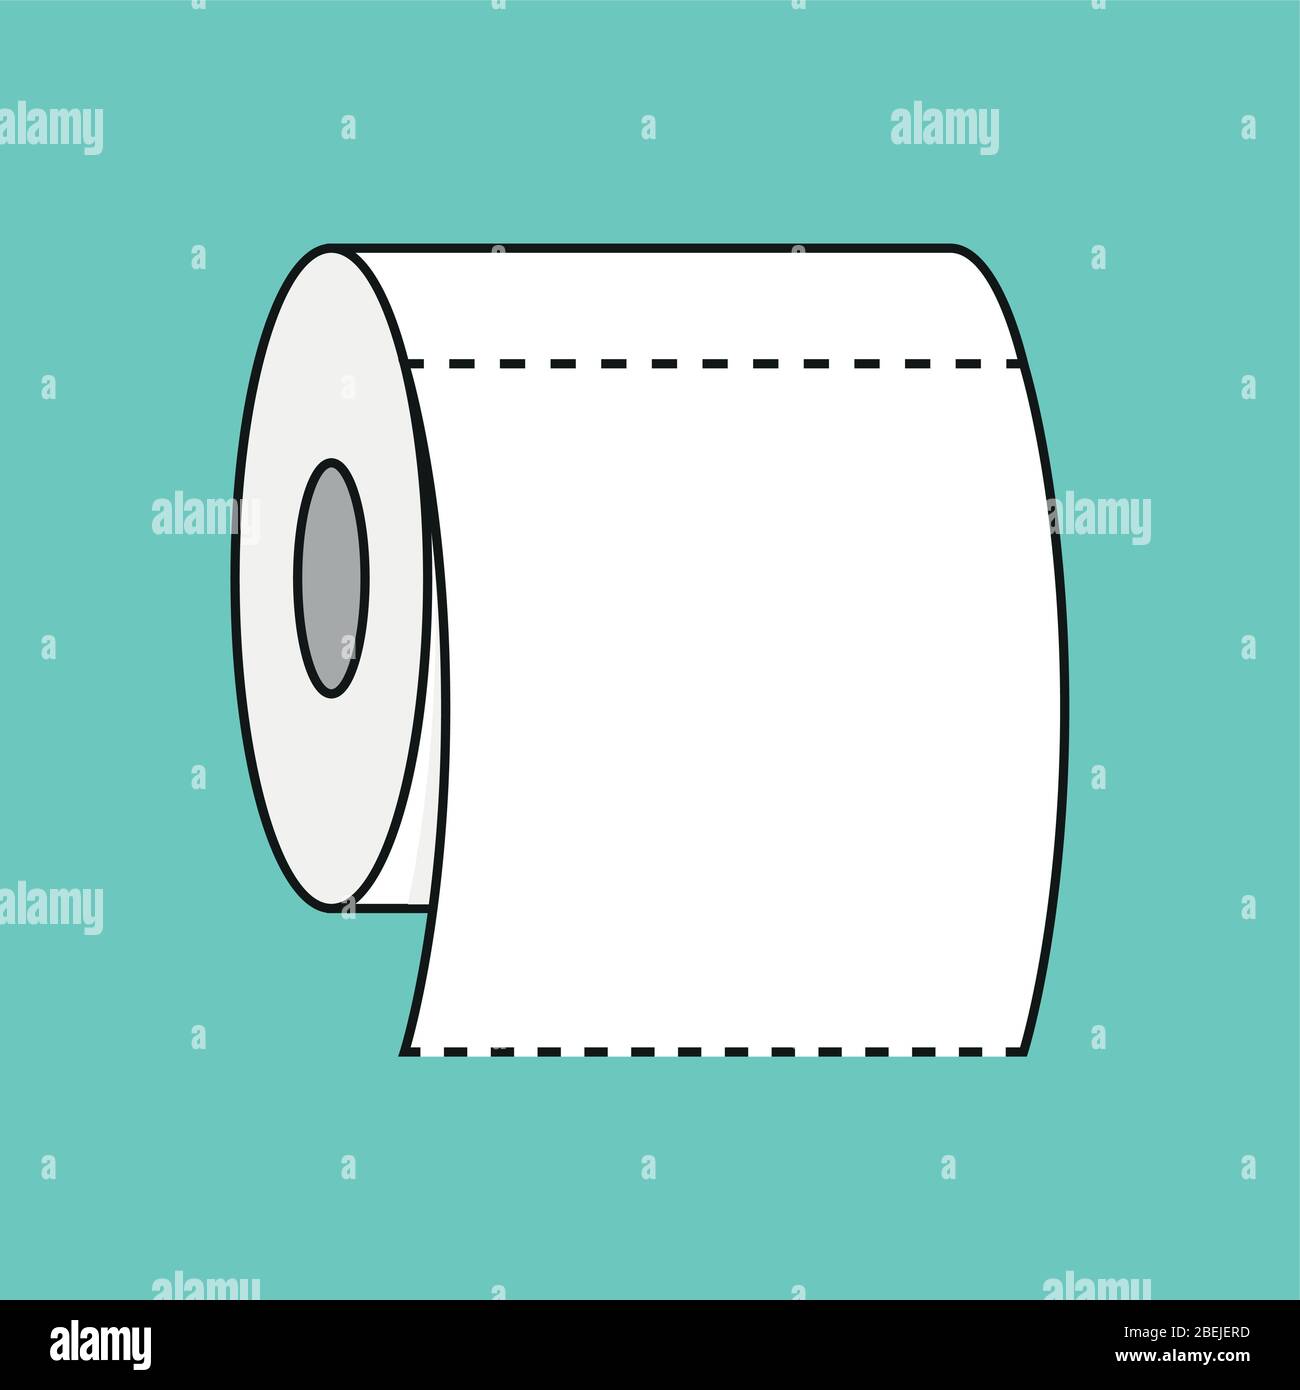 roll of toilet paper icon vector illustration EPS10 Stock Vector